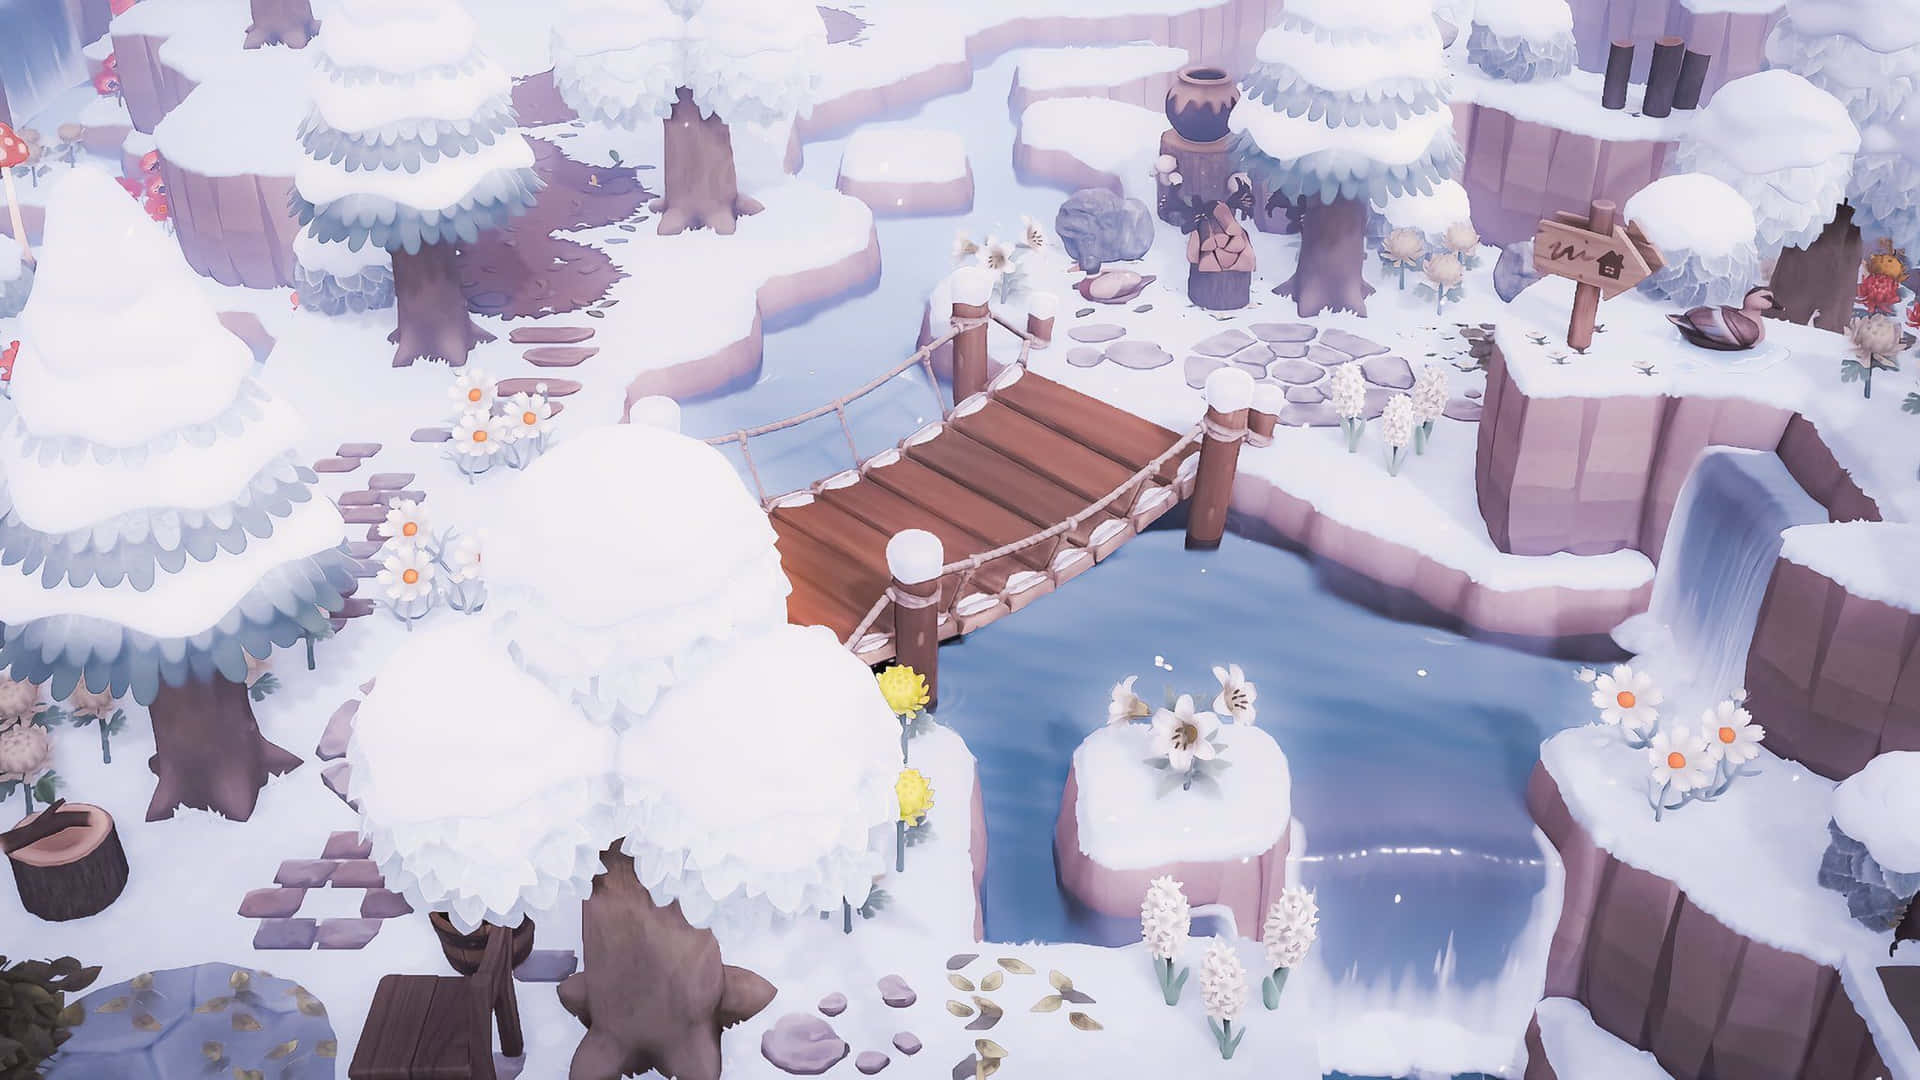 Explore the snow-covered town of Animal Crossing: Winter Wallpaper